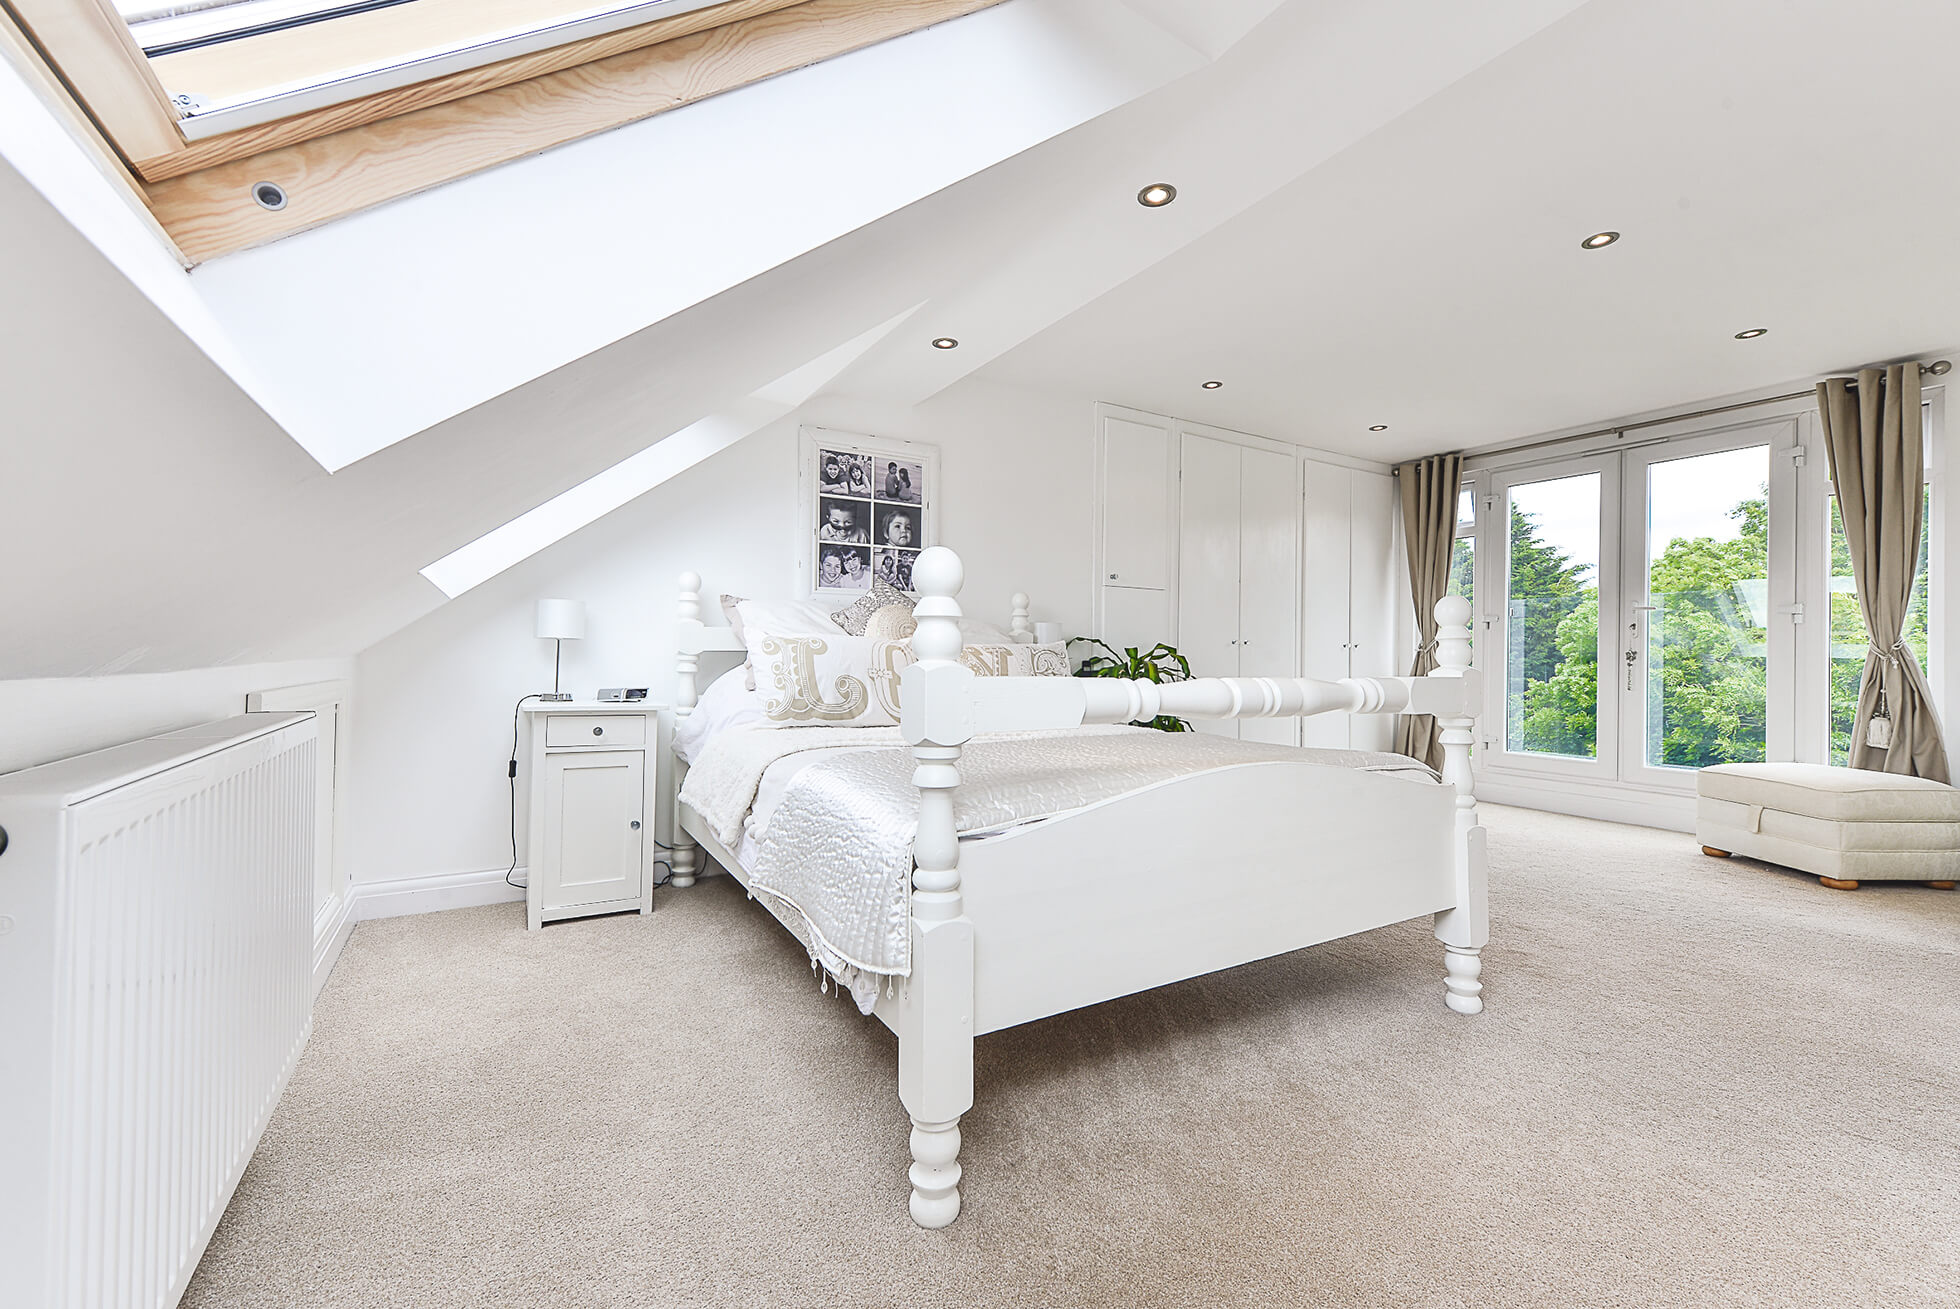 Do you have a question about converting your Loft in Aldenham? Here are the most popular questions asked by our clients.